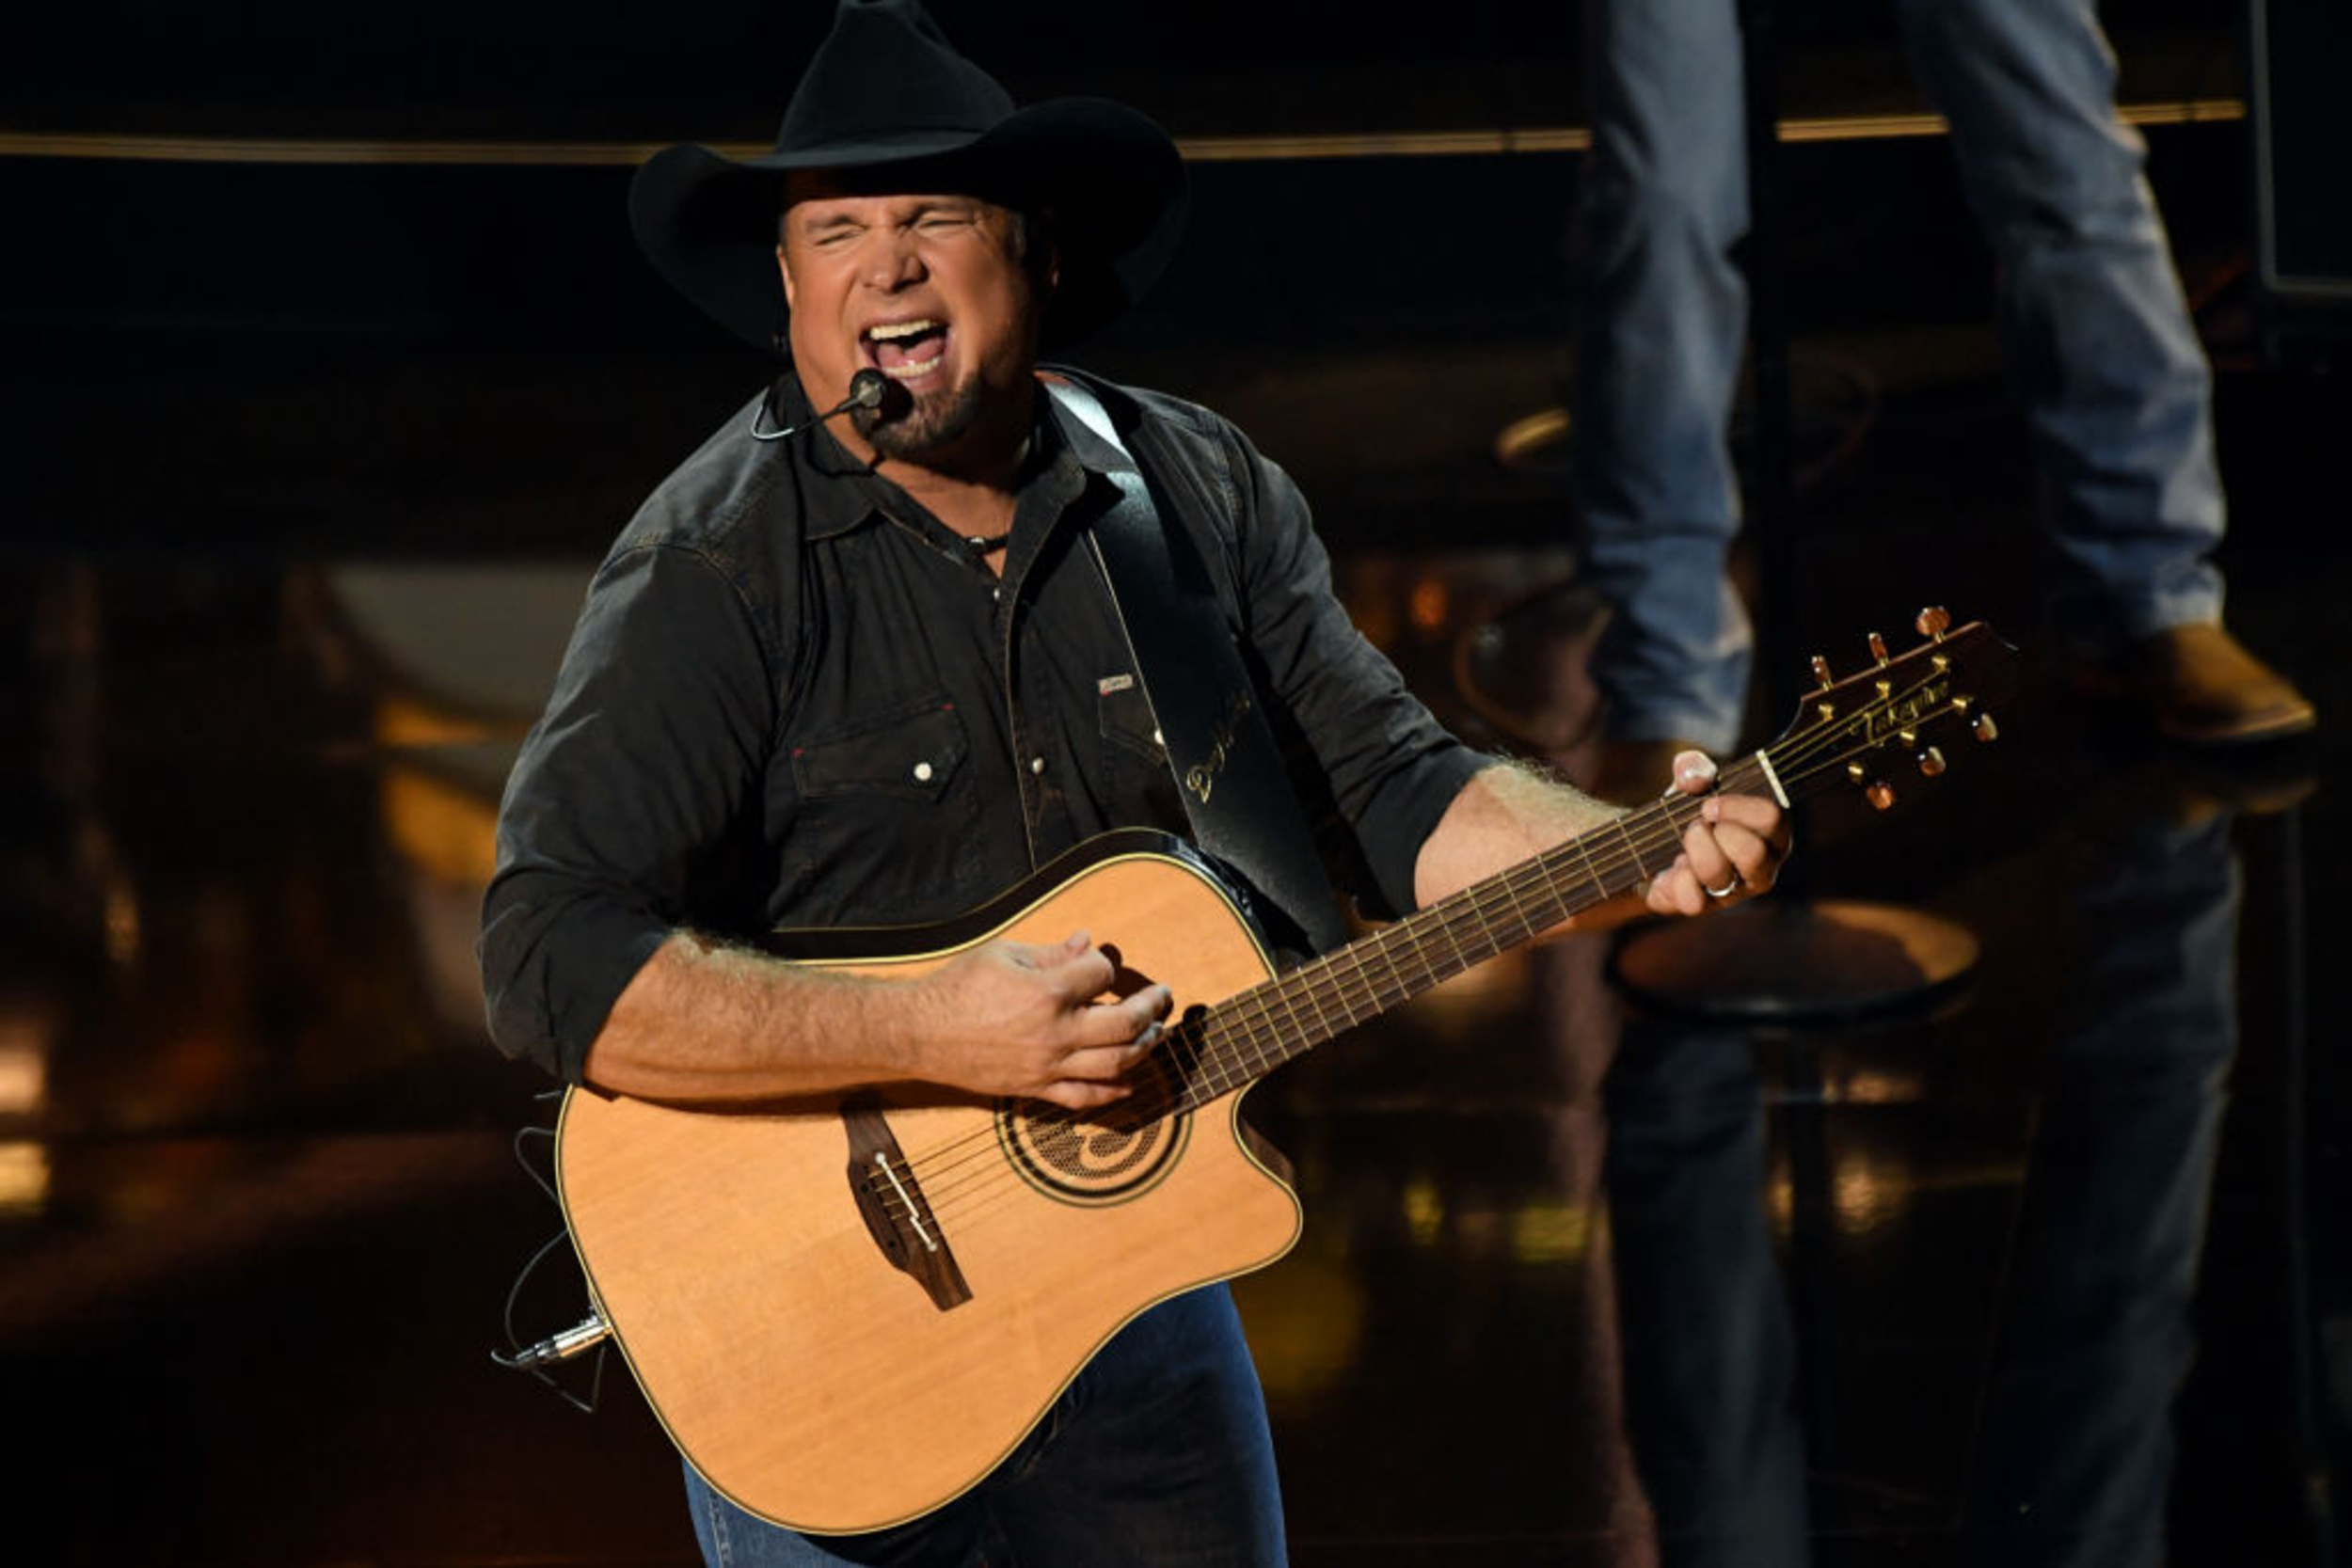 <p>In 1998, Garth Brooks recorded "Make You Feel My Love," written by Bob Dylan, for the soundtrack for the movie "Hope Floats," starring Sandra Bullock. The cover earned Grammy nominations for both Dylan and Brooks, along with topping the country charts. </p><p><a href='https://www.msn.com/en-us/community/channel/vid-cj9pqbr0vn9in2b6ddcd8sfgpfq6x6utp44fssrv6mc2gtybw0us'>Follow us on MSN to see more of our exclusive entertainment content.</a></p>